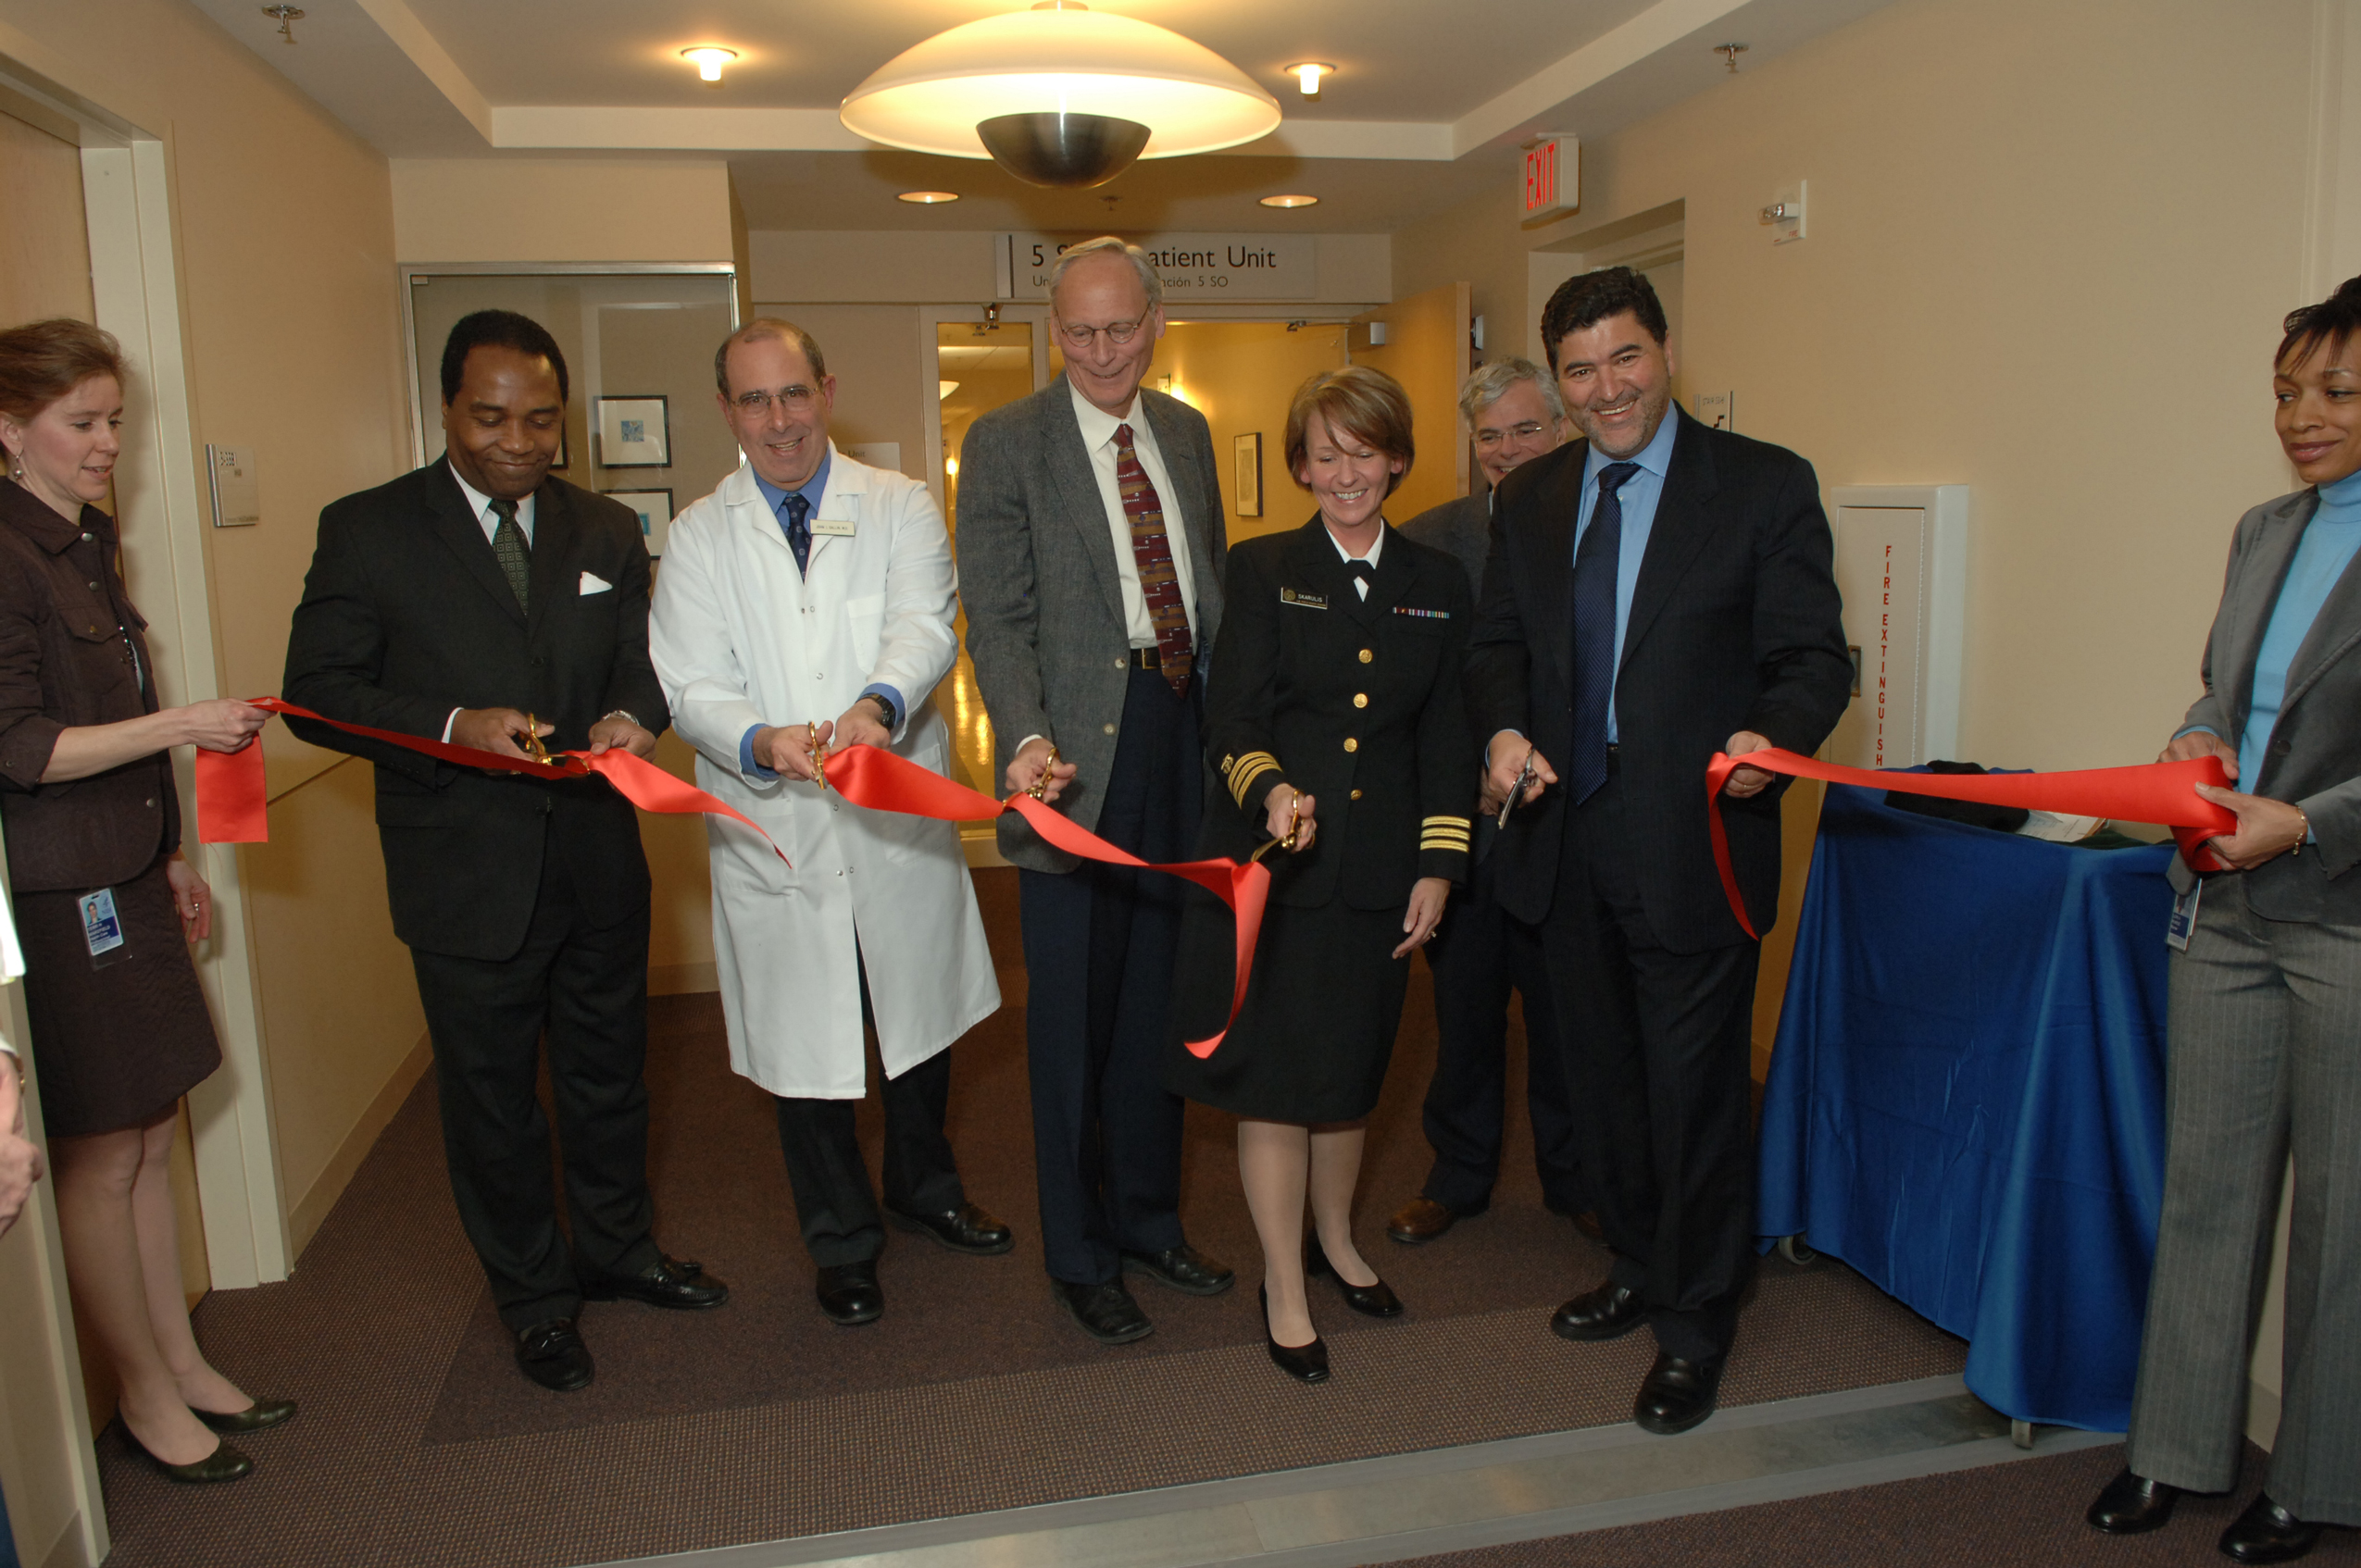 A photo of the ribbon cutting for Metabolic Clinical Research Unit